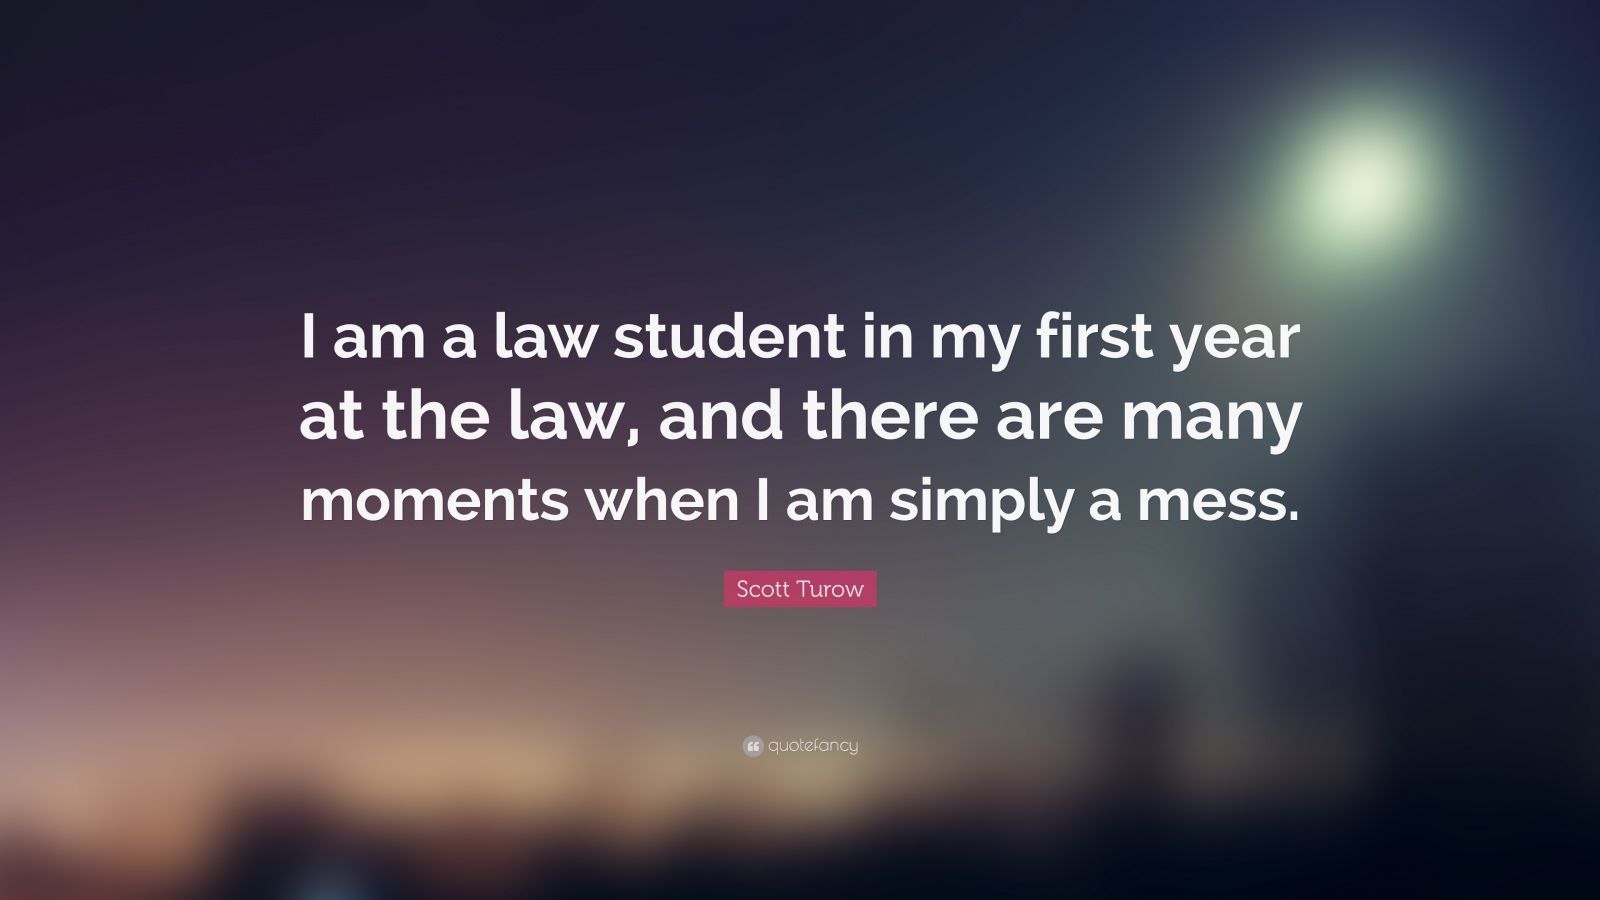 Scott Turow Quote: “I am a law student in my first year at the law, and there are many moments when I am simply a mess.”